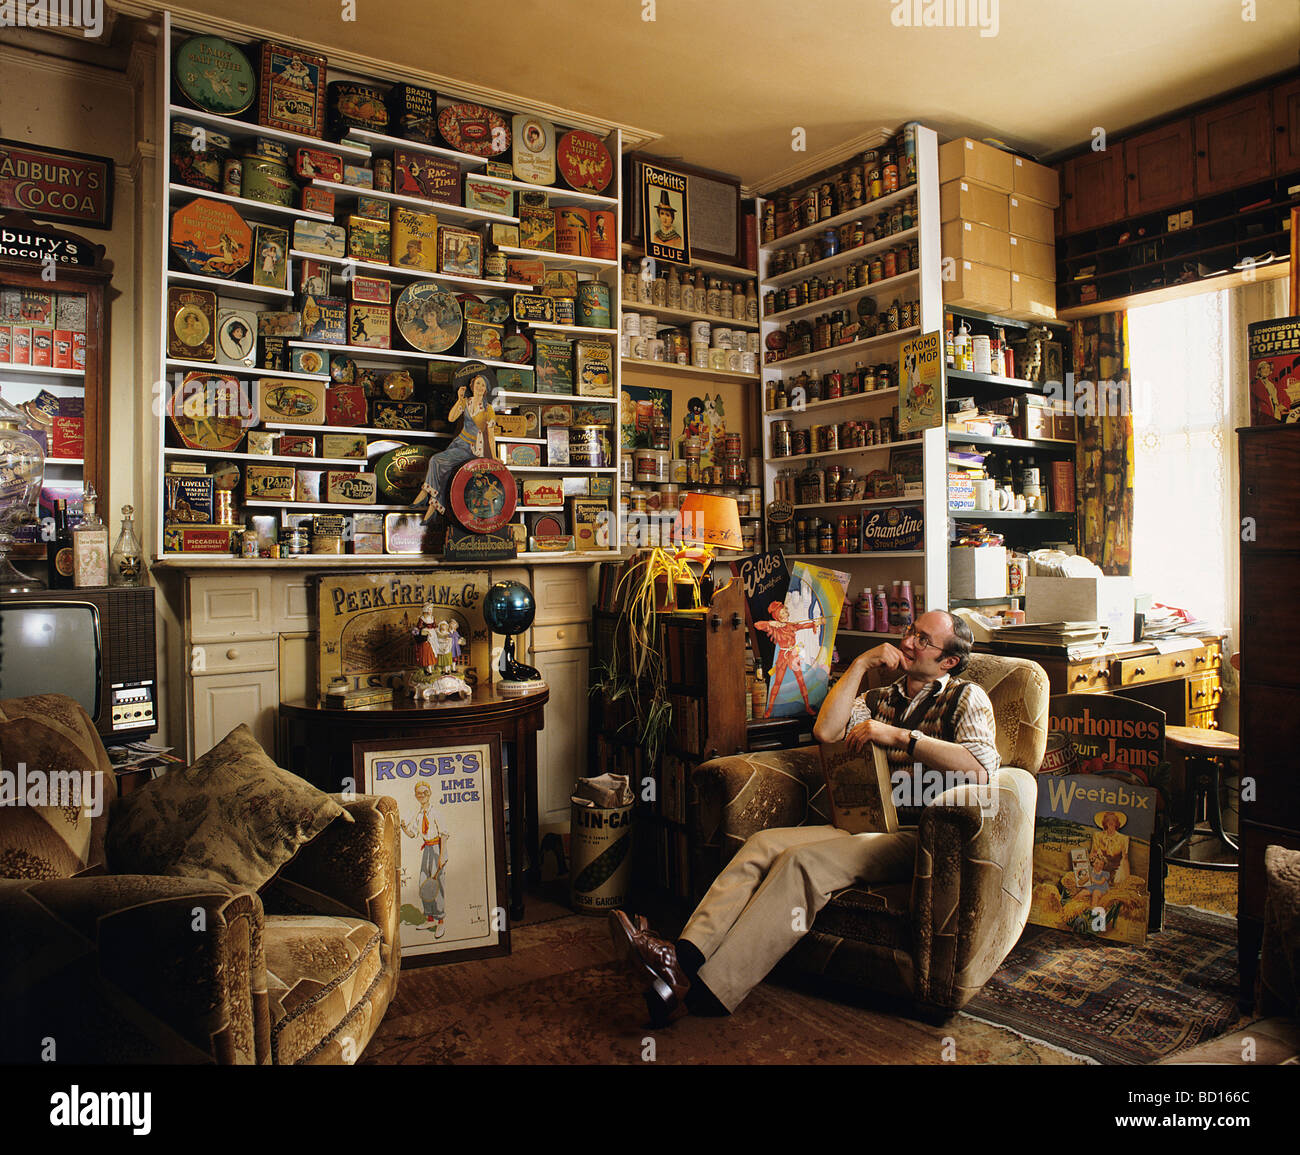 Robert Opie, collector of Advertising and Packaging, and museum curator (The Opie Collection), in his home living room. Stock Photo